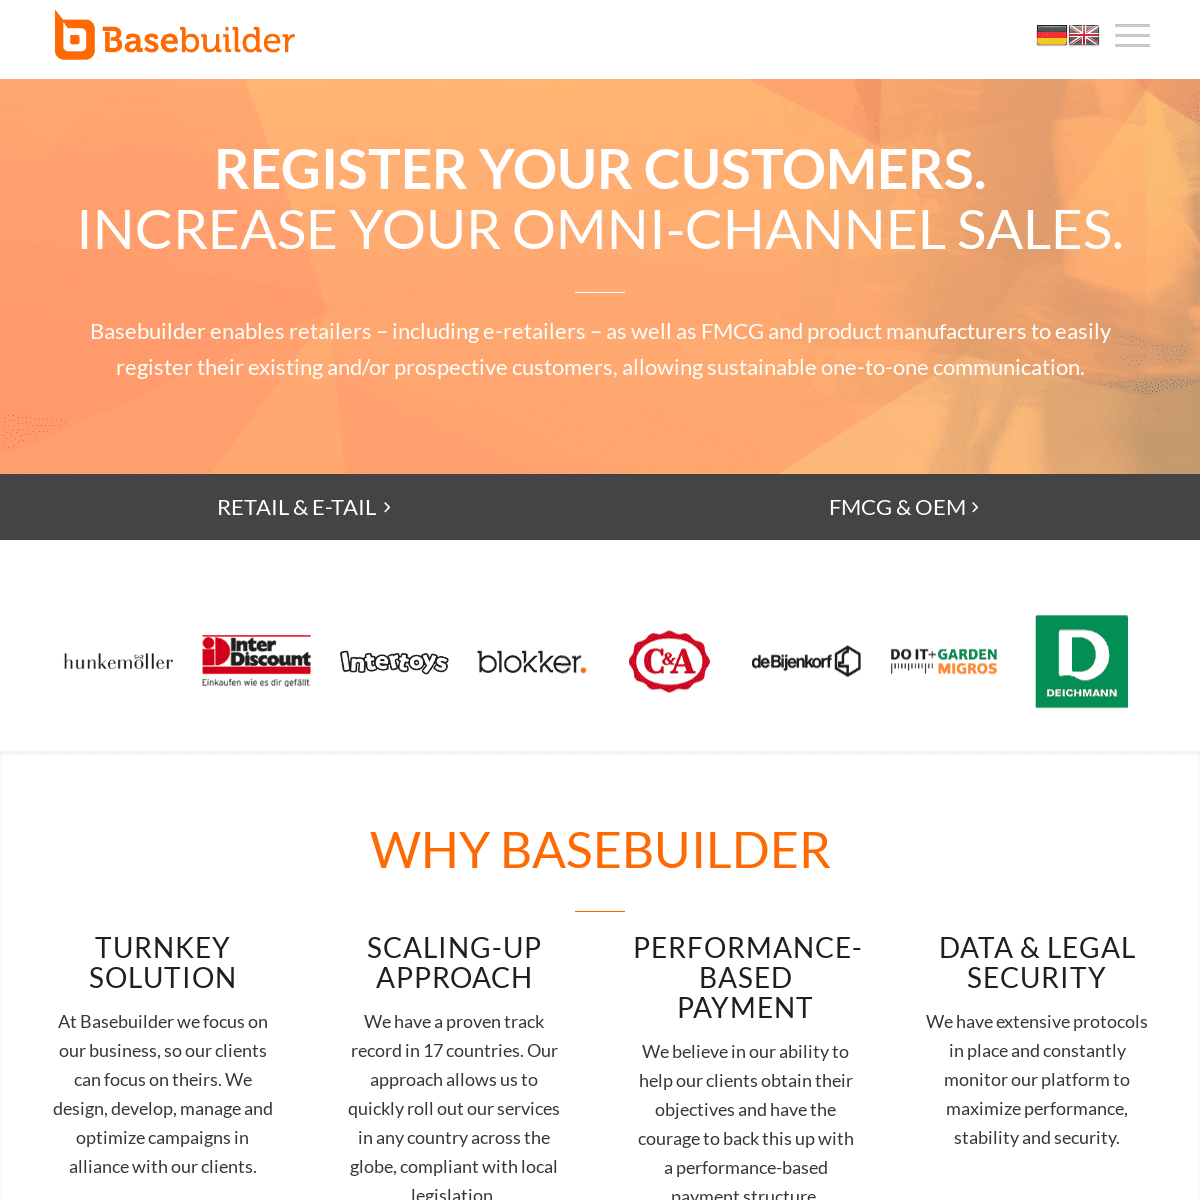 Basebuilder - Register your customers. Increase your omni-channel sales.